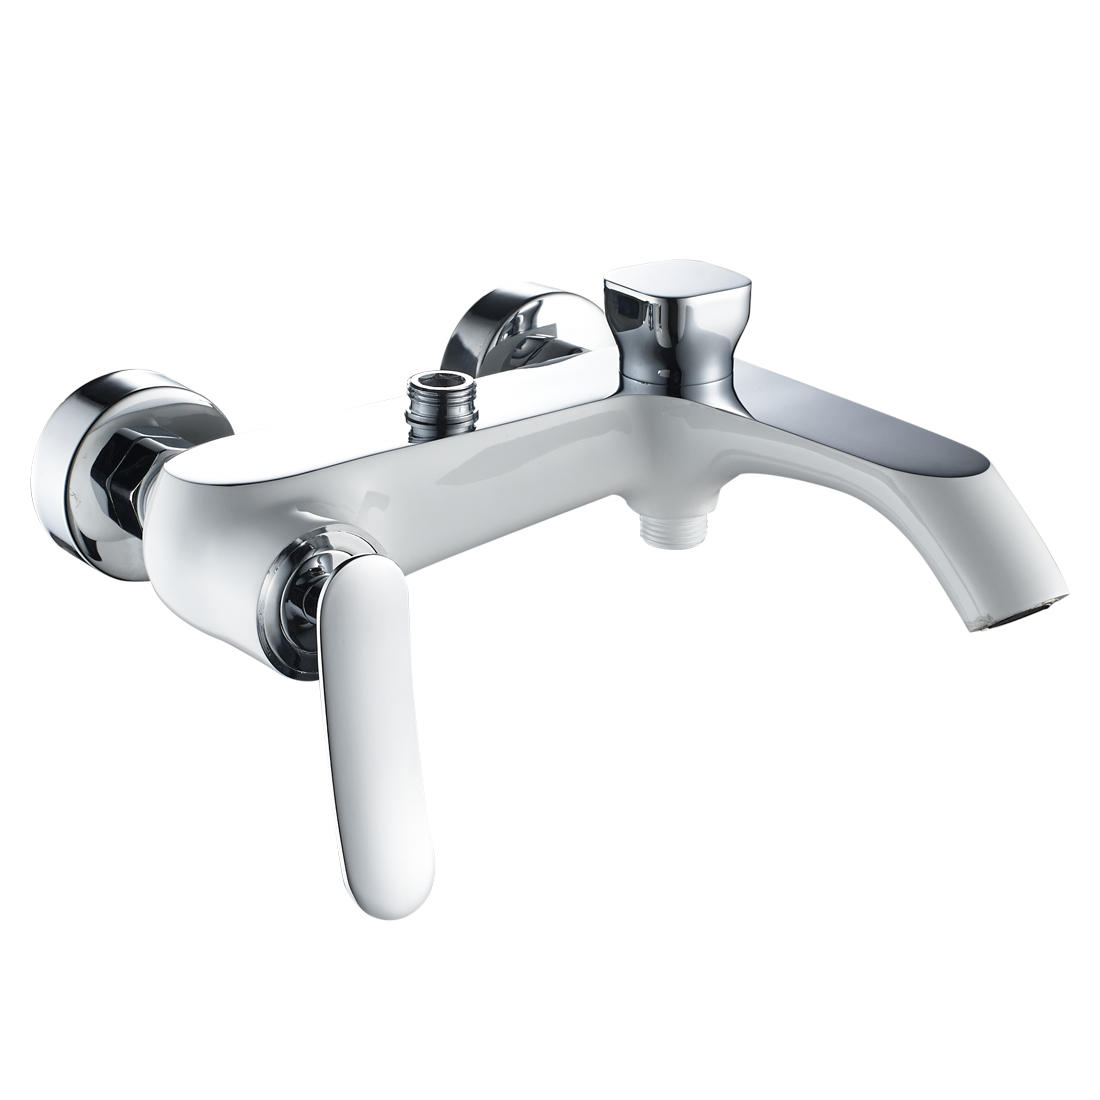 Shower Mixer Valve,Wall Mounted Single Lever Manual Exposed Shower Hot/Cold Valve Tap Faucet,Chrome with White Finish